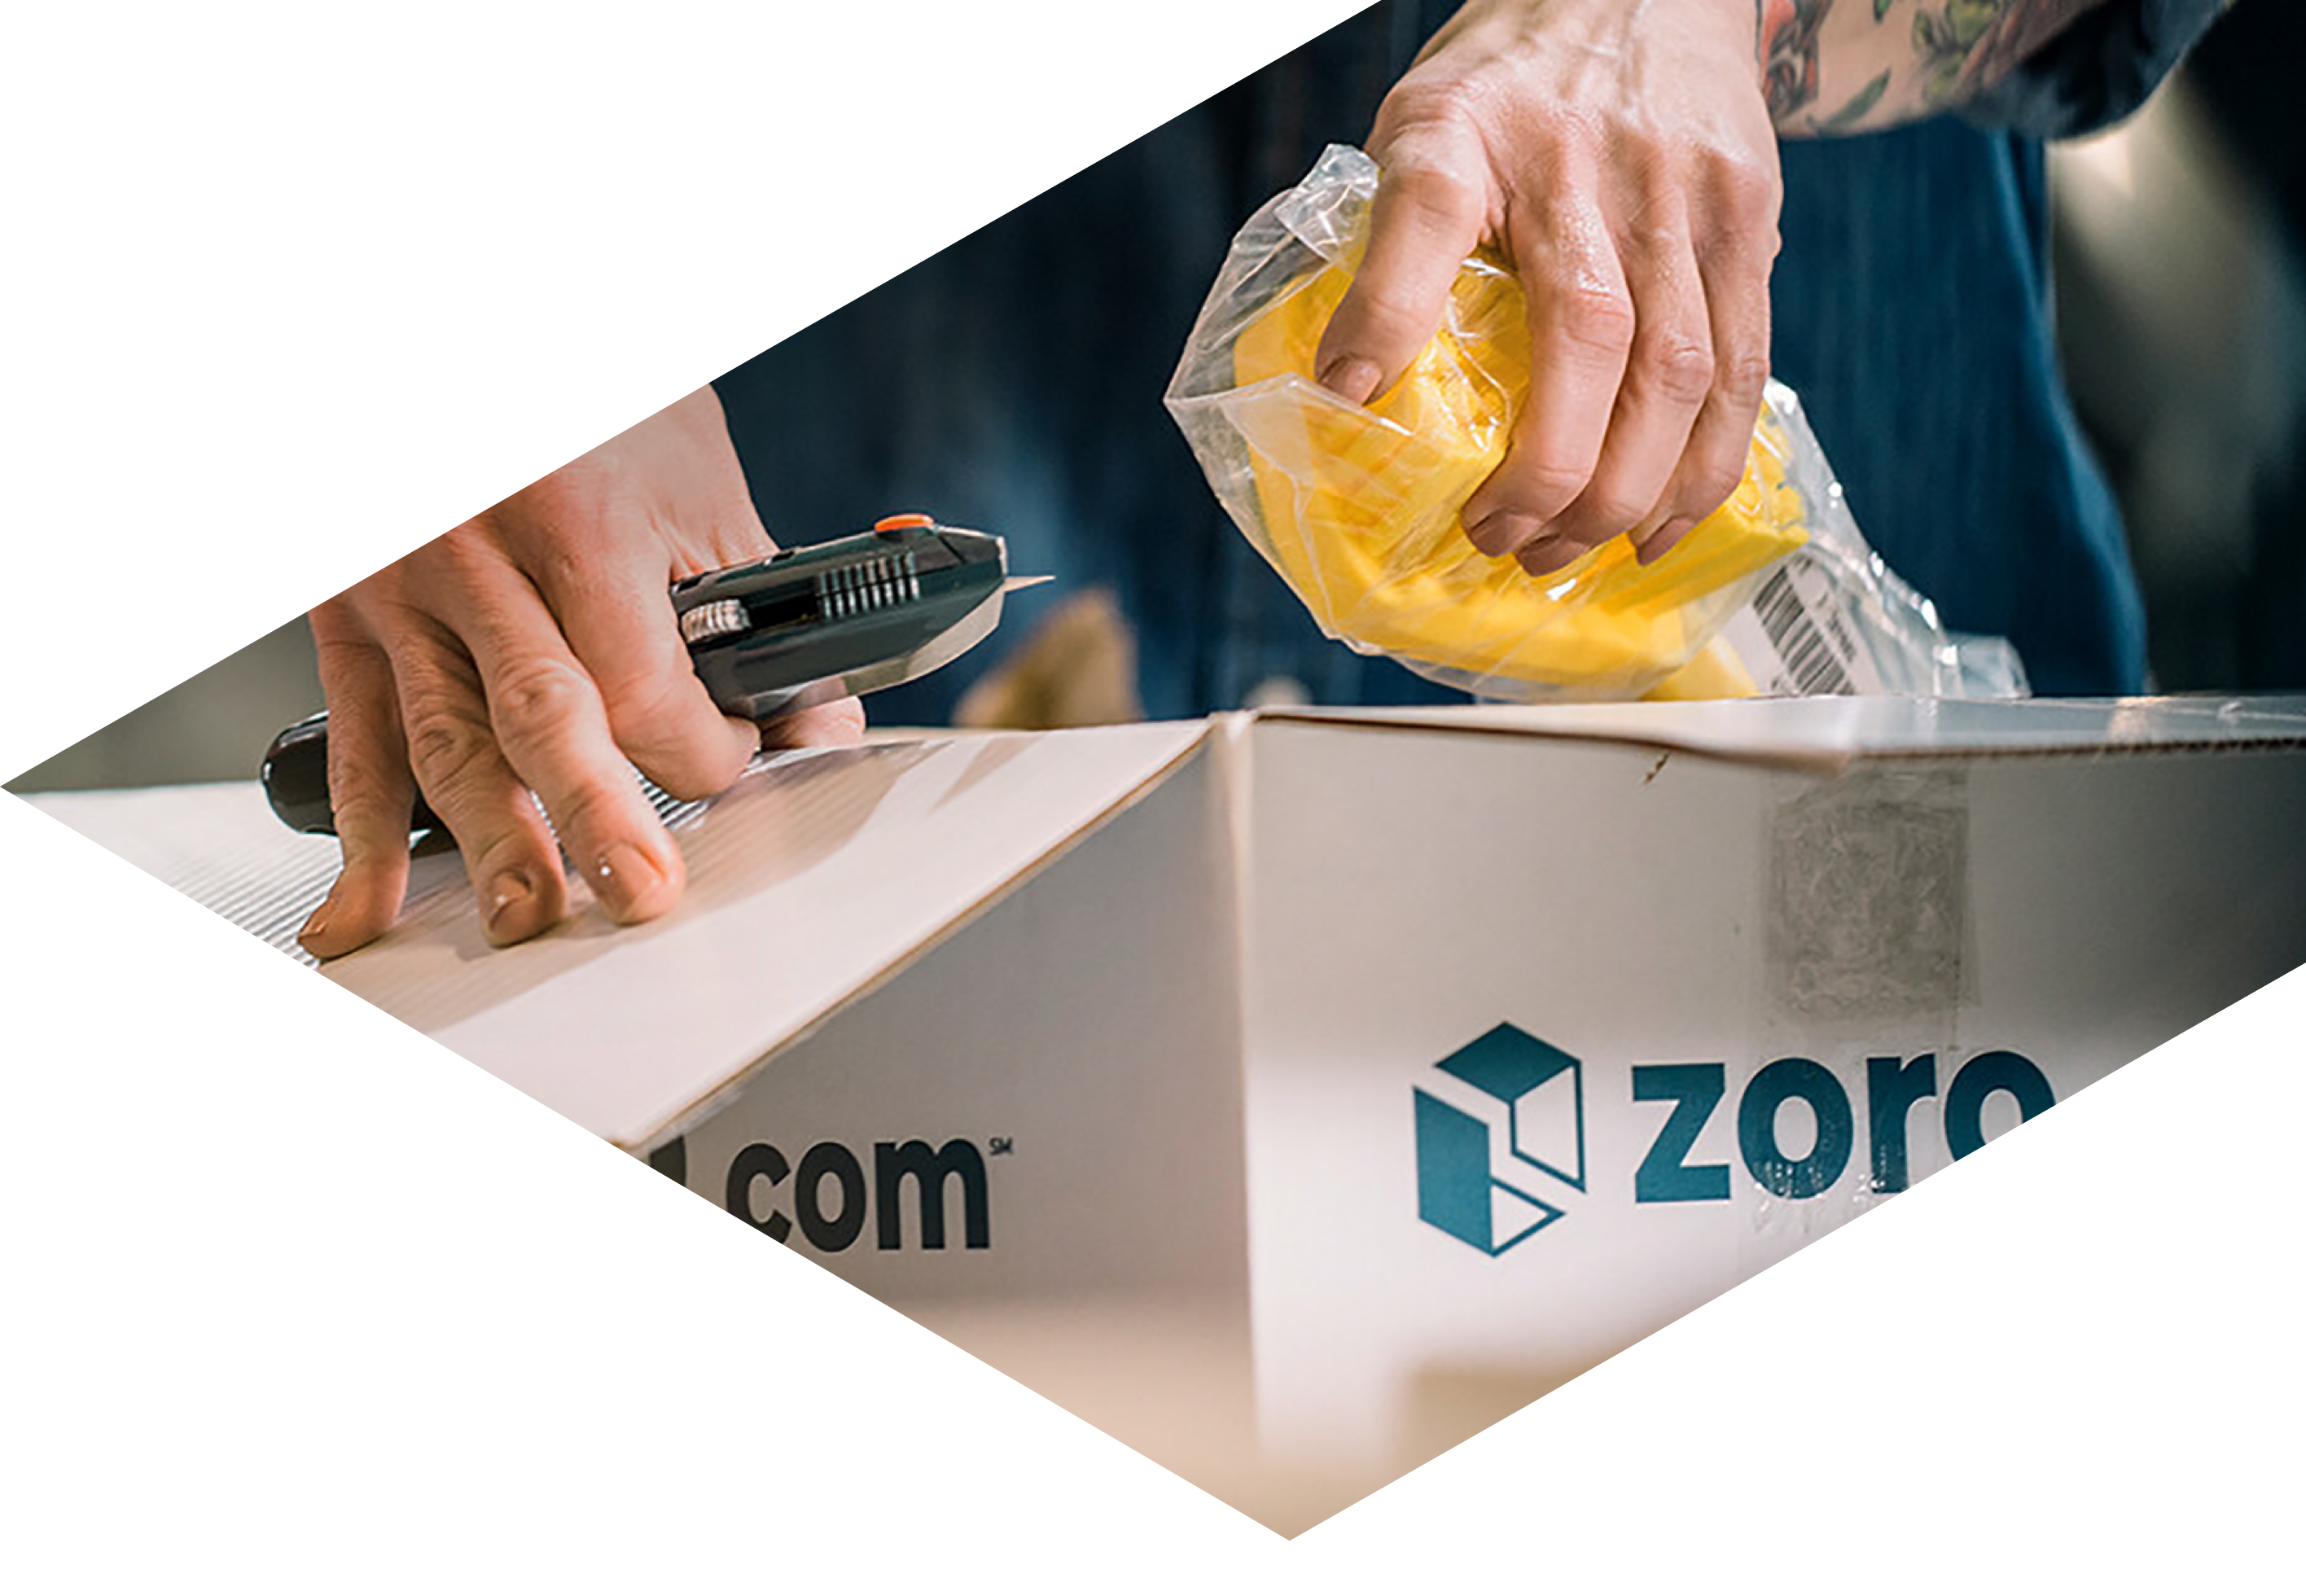 How Zoro.com leverages the flexibility and scalability of MACH® to deliver commerce experiences that exceed customer expectations and drive business growth